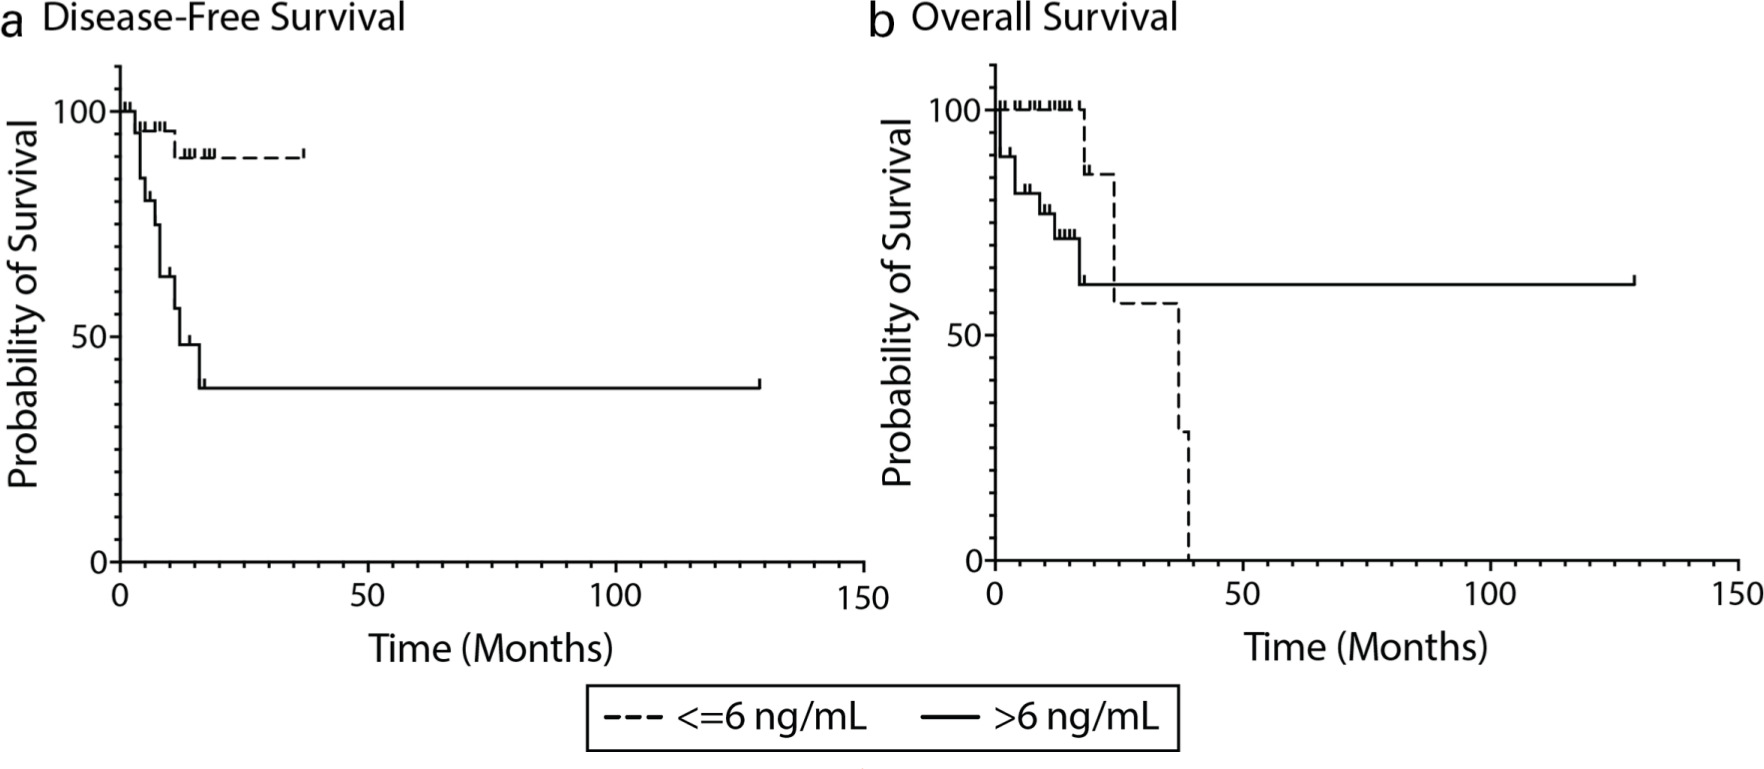 Fig. 2 
            Disease-free and overall survival for sarcoma patients depending on amount of cell-free DNA (cfDNA) at time of surgery. a) Patients with ≤ 6 ng/ml cfDNA have significantly better disease-free survival than patients with > 6 ng/ml cfDNA (90% vs 48% at one year for ≤ 6 ng/ml and > 6 ng/ml, respectively; p = 0.005, univariate analysis). b) With available numbers, a significant difference in overall survival was not detected in patients based on the level of cfDNA (p = 0.064, univariate analysis).
          